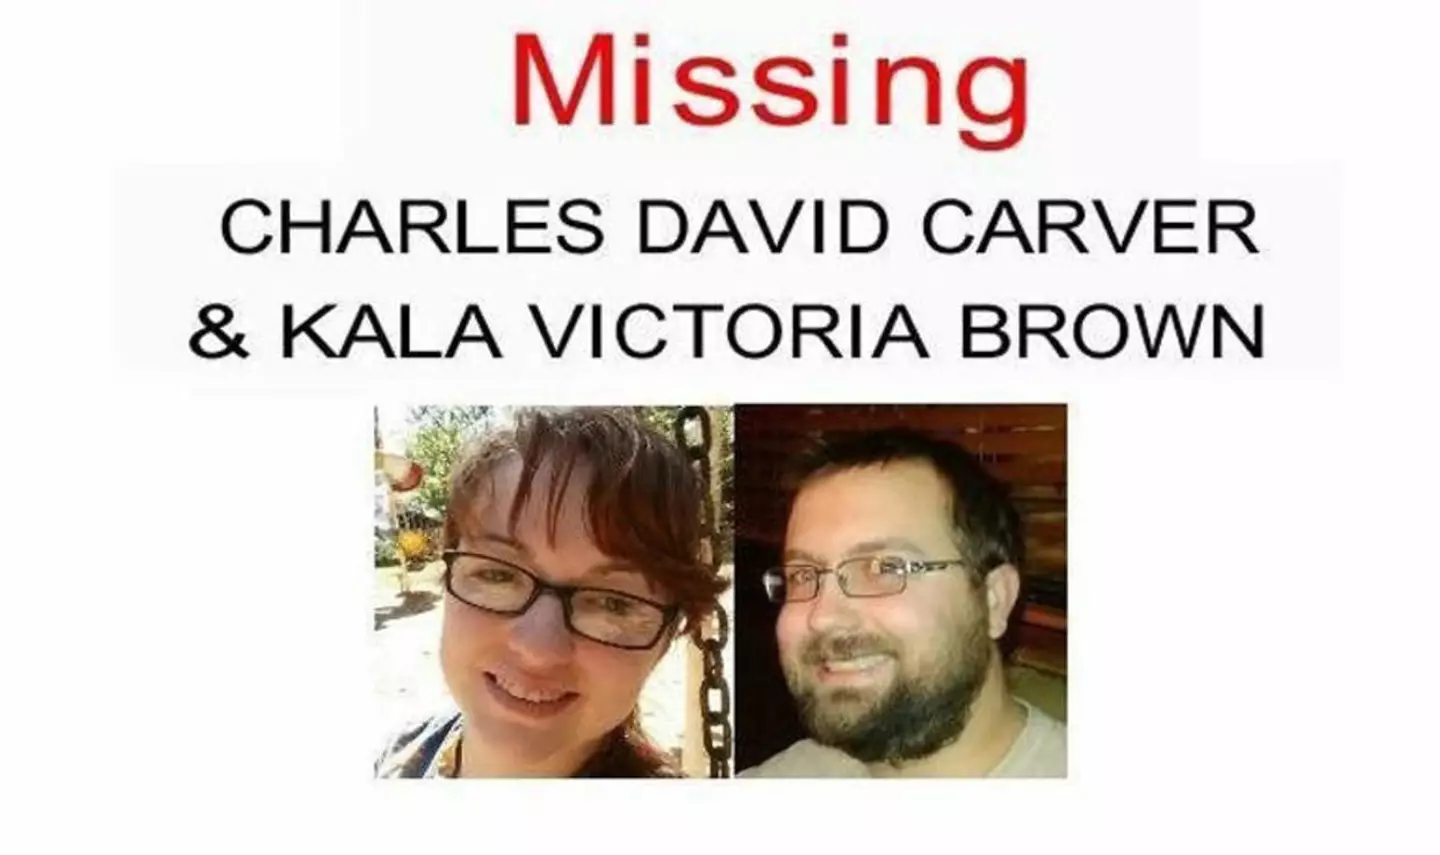 Brown and Carver were reported missing.